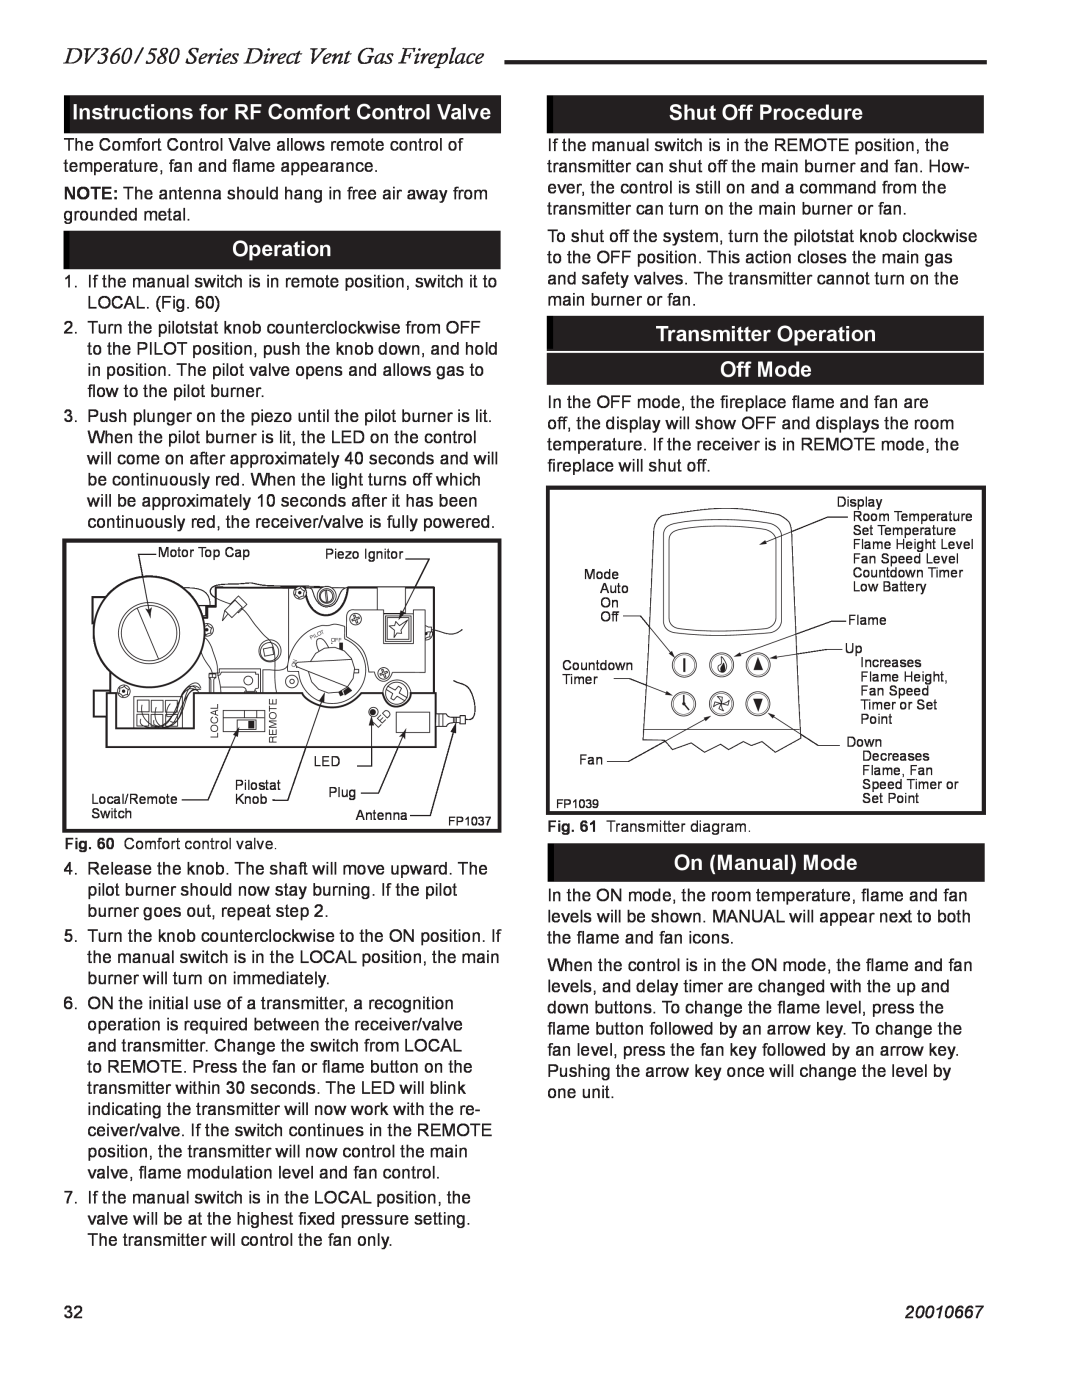 Vermont Casting DV360 Instructions for RF Comfort Control Valve, Operation, Shut Off Procedure, On Manual Mode, 20010667 